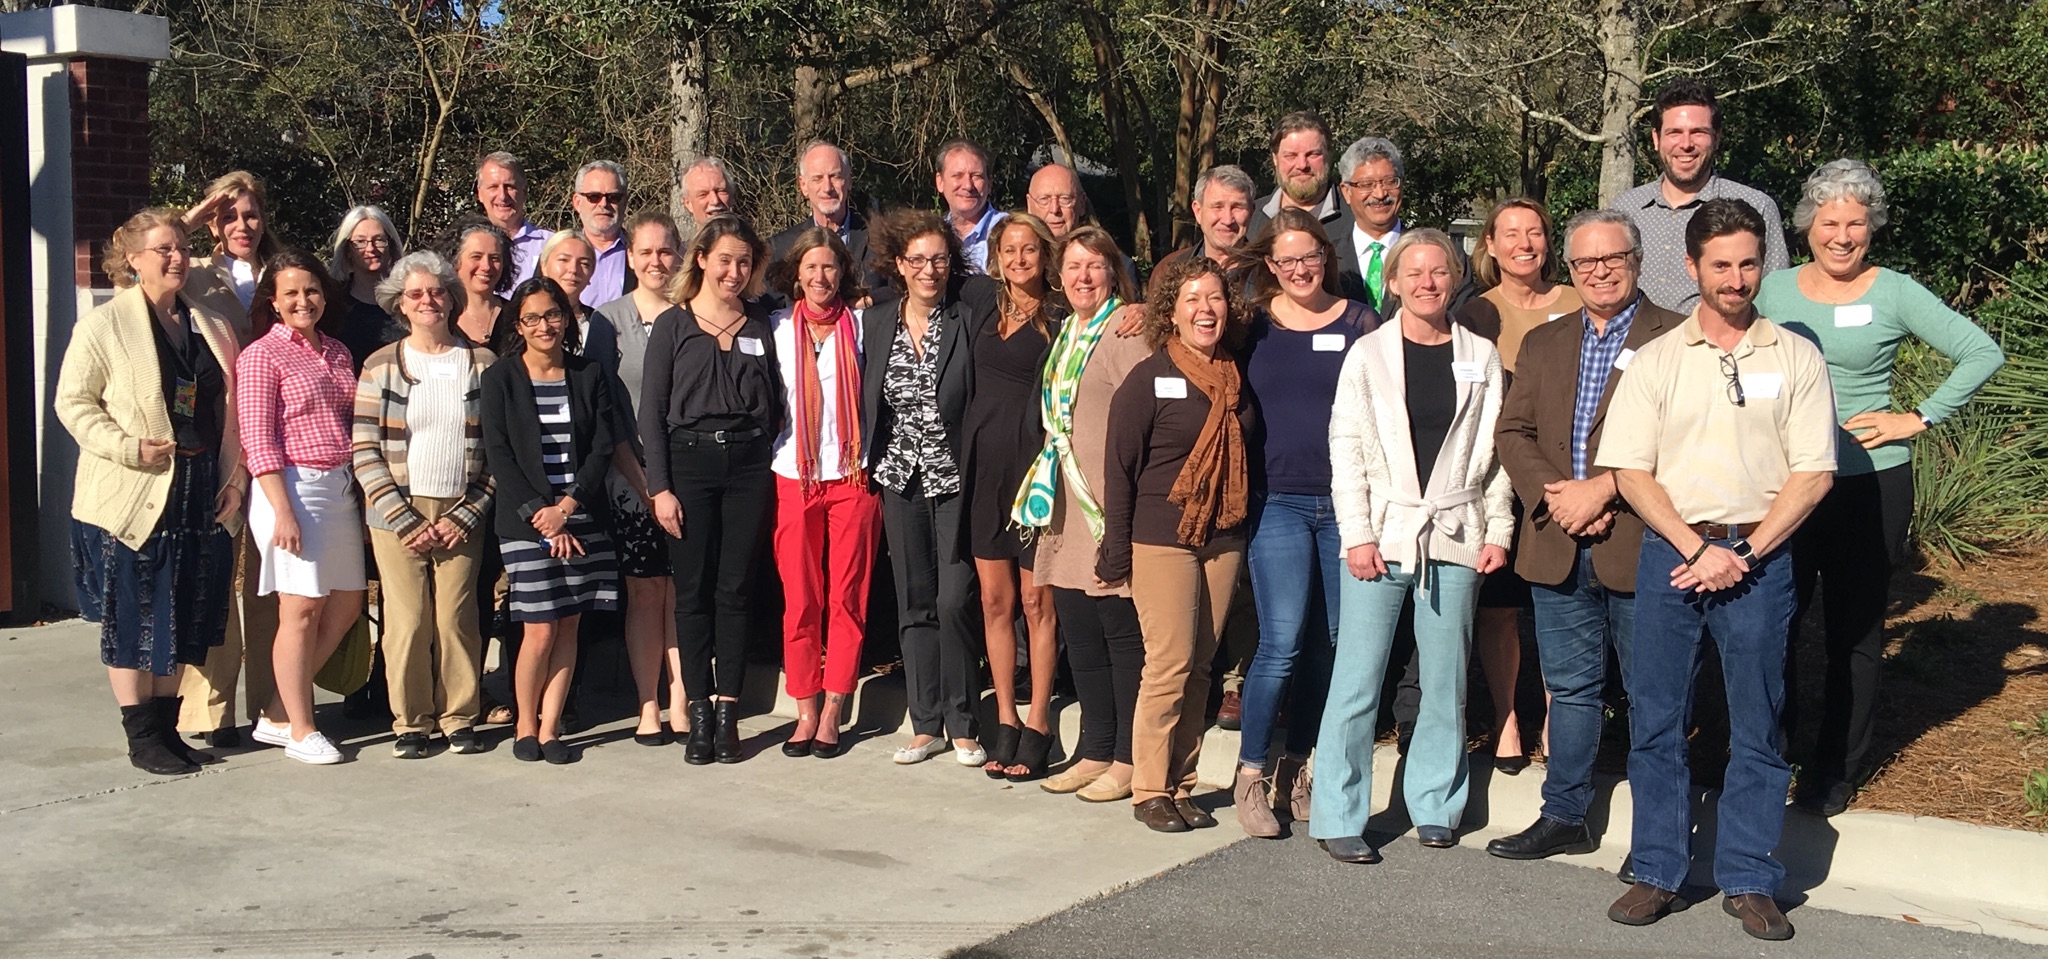 Participants in the Global Organic Textile Standards (GOTS) roundtable gather for a group photo.